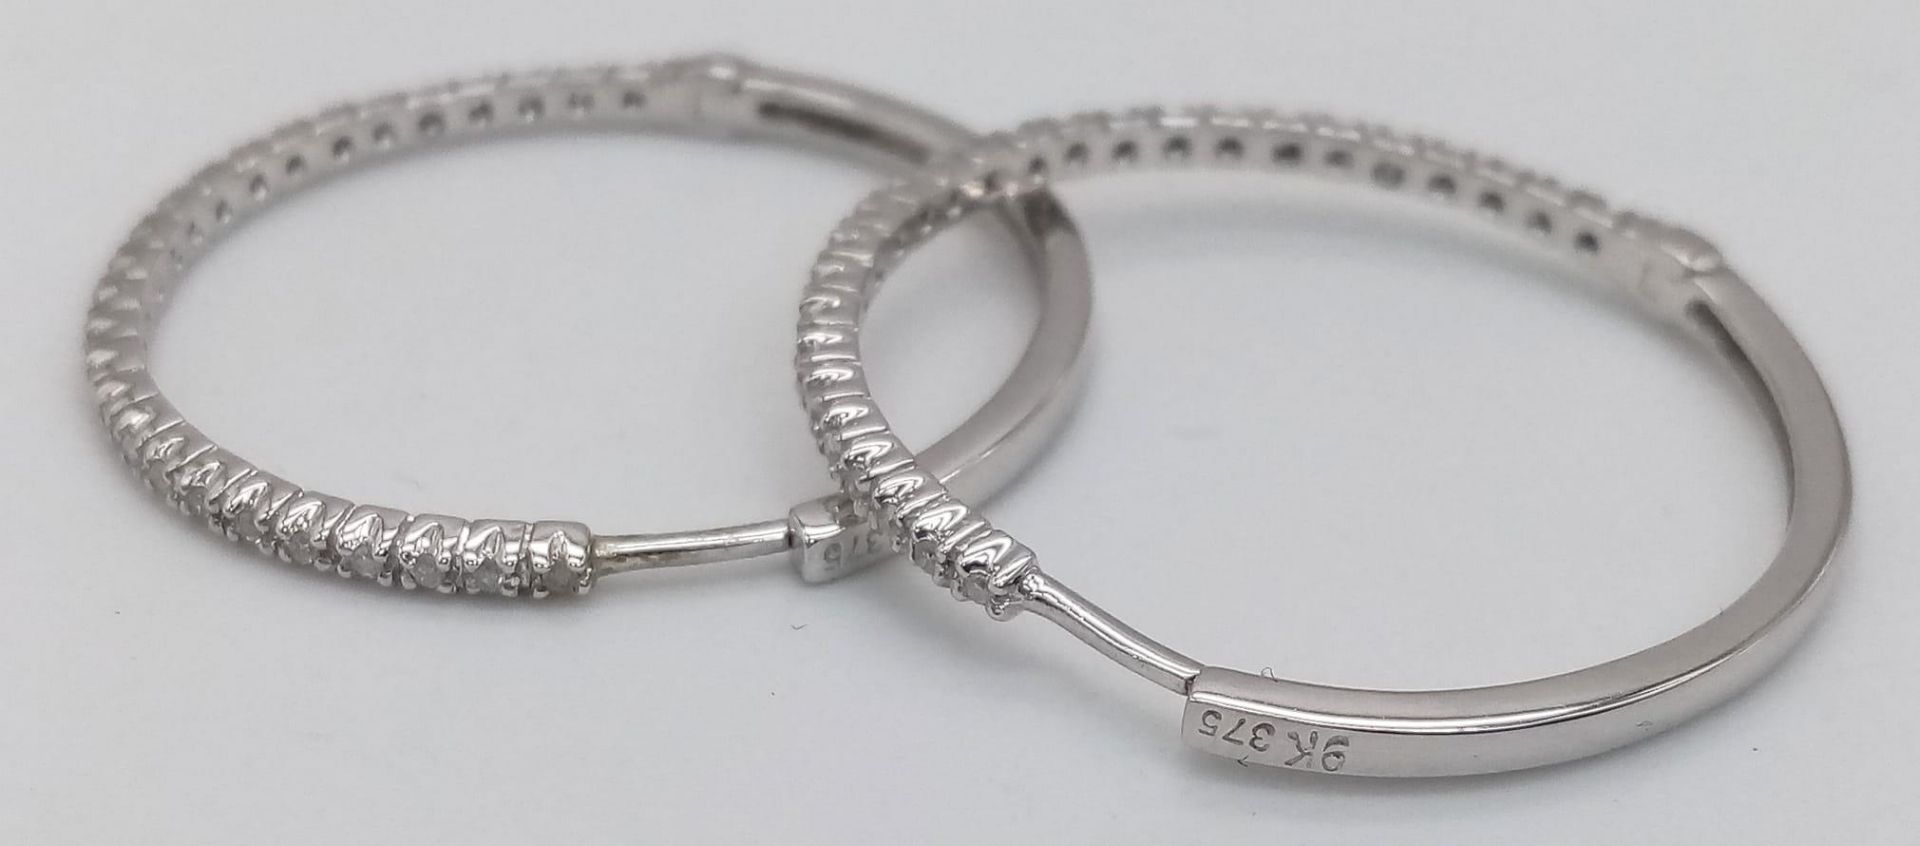 A PAIR OF 9K WHITE GOLD DIAMOND SET HOOP EARRINGS, APPROX 0.30CT DIAMONDS, WEIGHT 3.6G - Image 6 of 10